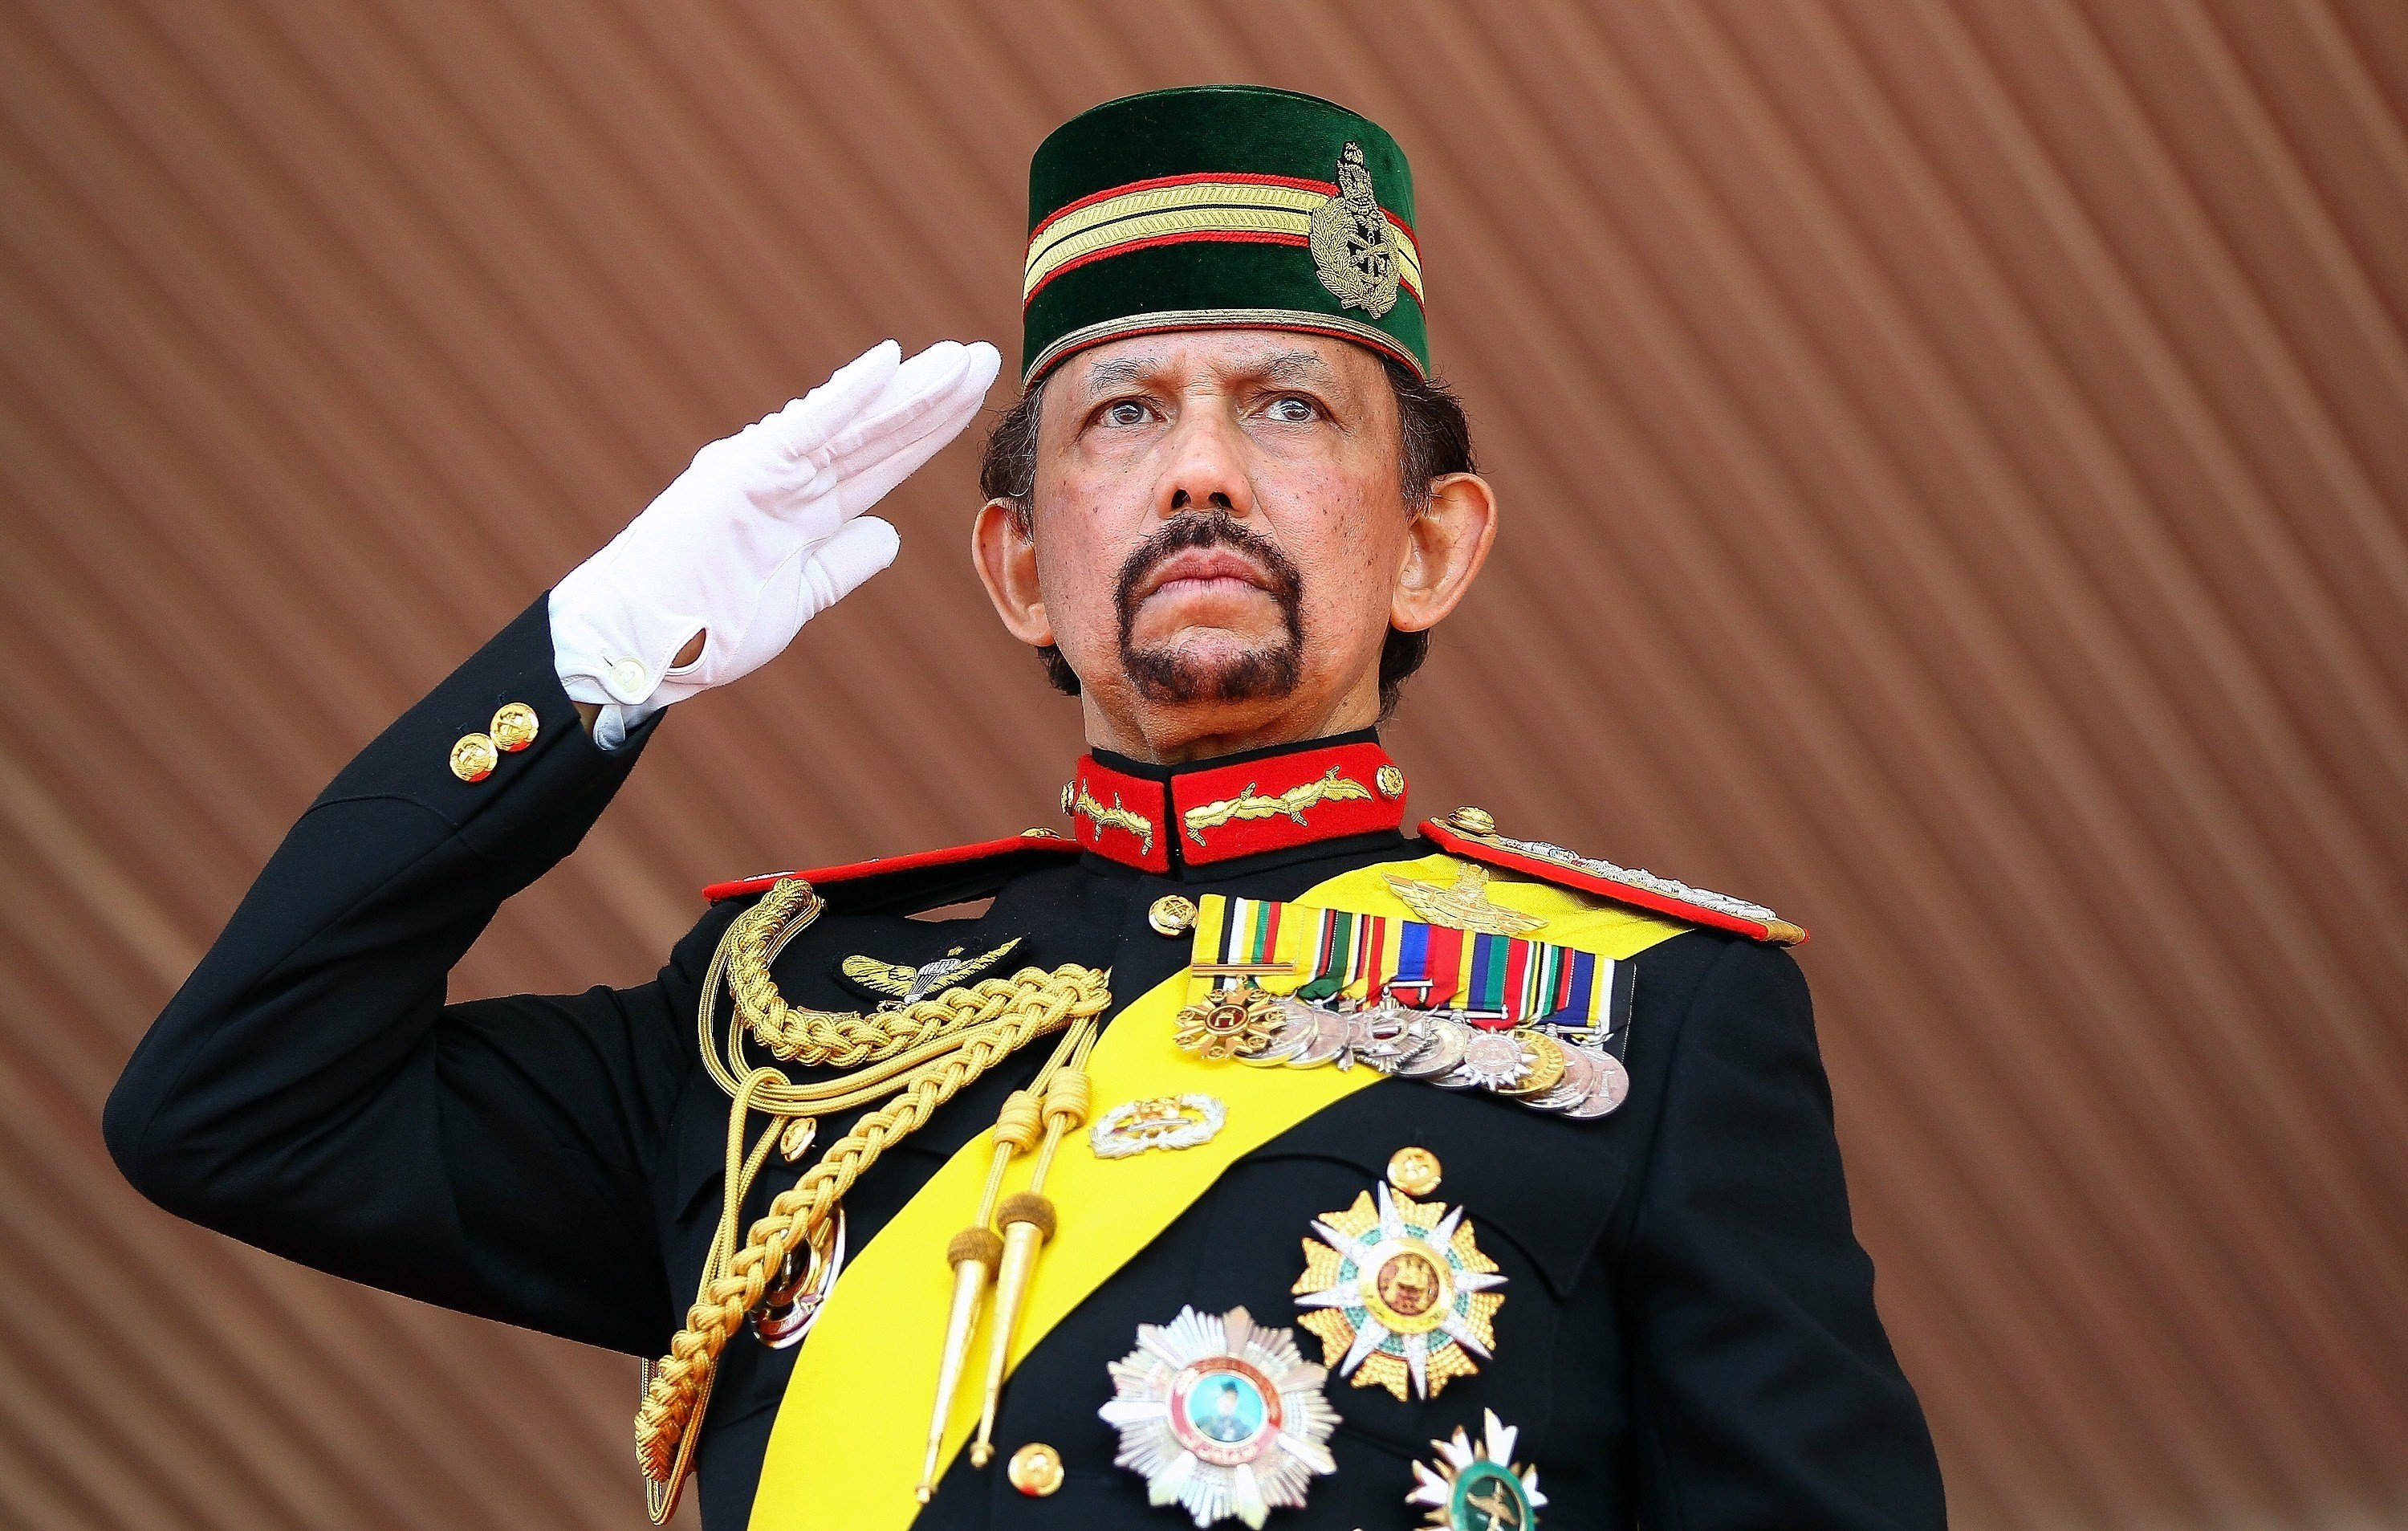 Brunei's Sultan Hassanal Bolkiah salutes during a ceremonial guard of honour to mark his 68th birthday celebrations in Bandar Seri Begawan on August 14, 2014. The monarch turned 68 on July 15, but the celebrations were postponed due to the holy month of Ramadan. The sultan is one of the world's longest-reigning monarchs. AFP PHOTO (Photo credit should read STR/AFP/Getty Images)